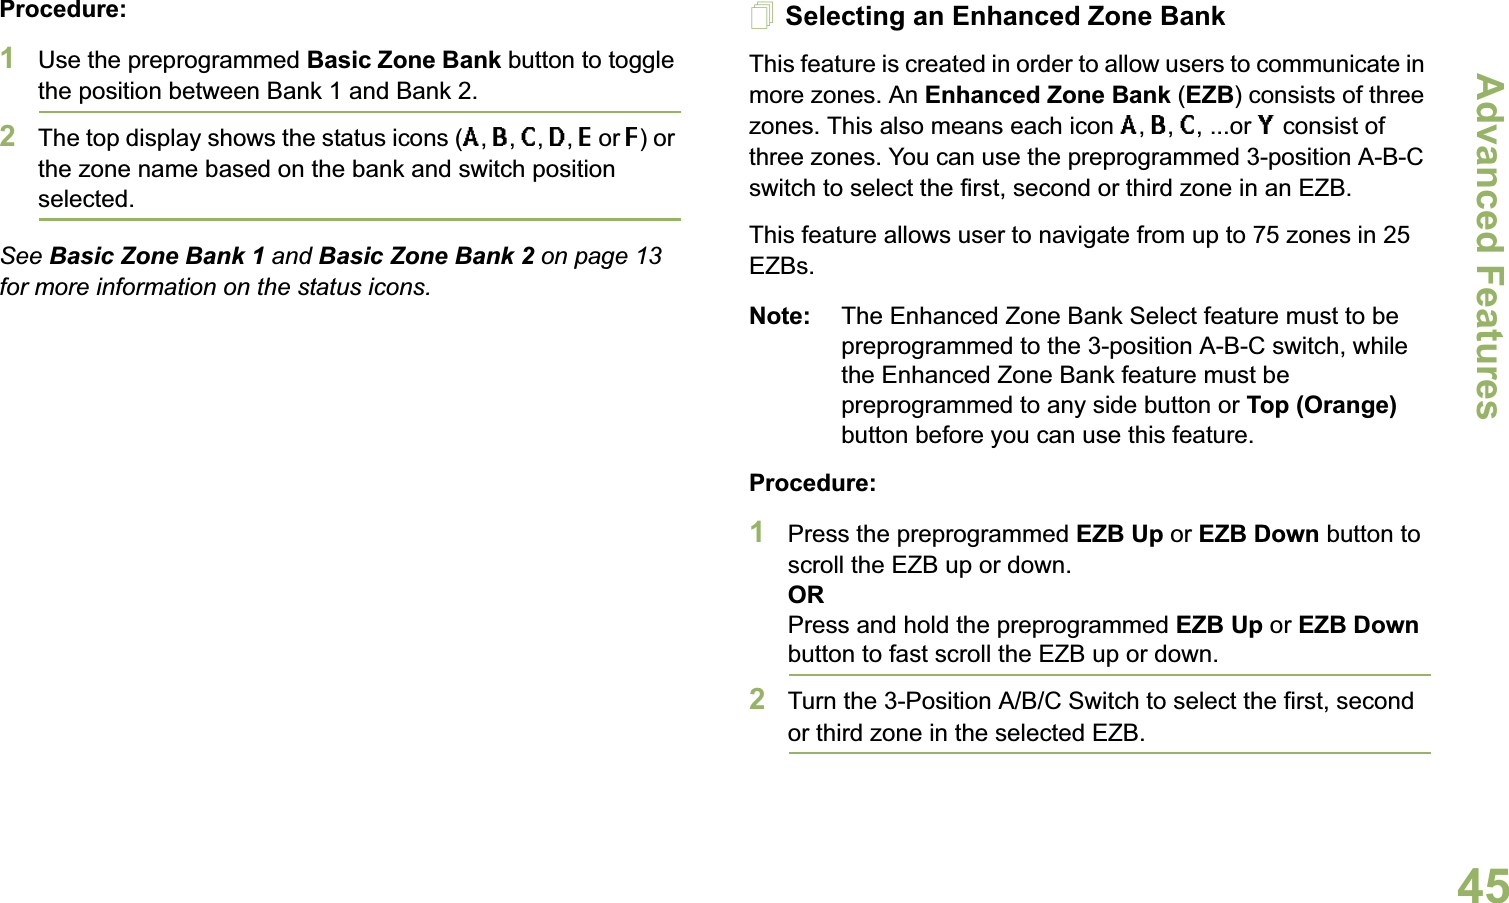 Advanced FeaturesEnglish45Procedure: 1Use the preprogrammed Basic Zone Bank button to toggle the position between Bank 1 and Bank 2.2The top display shows the status icons (A, B, C, D, E or F) or the zone name based on the bank and switch position selected.See Basic Zone Bank 1 and Basic Zone Bank 2 on page 13 for more information on the status icons.Selecting an Enhanced Zone BankThis feature is created in order to allow users to communicate in more zones. An Enhanced Zone Bank (EZB) consists of three zones. This also means each icon A, B, C, ...or Y consist of three zones. You can use the preprogrammed 3-position A-B-C switch to select the first, second or third zone in an EZB.This feature allows user to navigate from up to 75 zones in 25 EZBs. Note: The Enhanced Zone Bank Select feature must to be preprogrammed to the 3-position A-B-C switch, while the Enhanced Zone Bank feature must be preprogrammed to any side button or Top (Orange) button before you can use this feature.Procedure: 1Press the preprogrammed EZB Up or EZB Down button to scroll the EZB up or down. ORPress and hold the preprogrammed EZB Up or EZB Down button to fast scroll the EZB up or down.2Turn the 3-Position A/B/C Switch to select the first, second or third zone in the selected EZB.